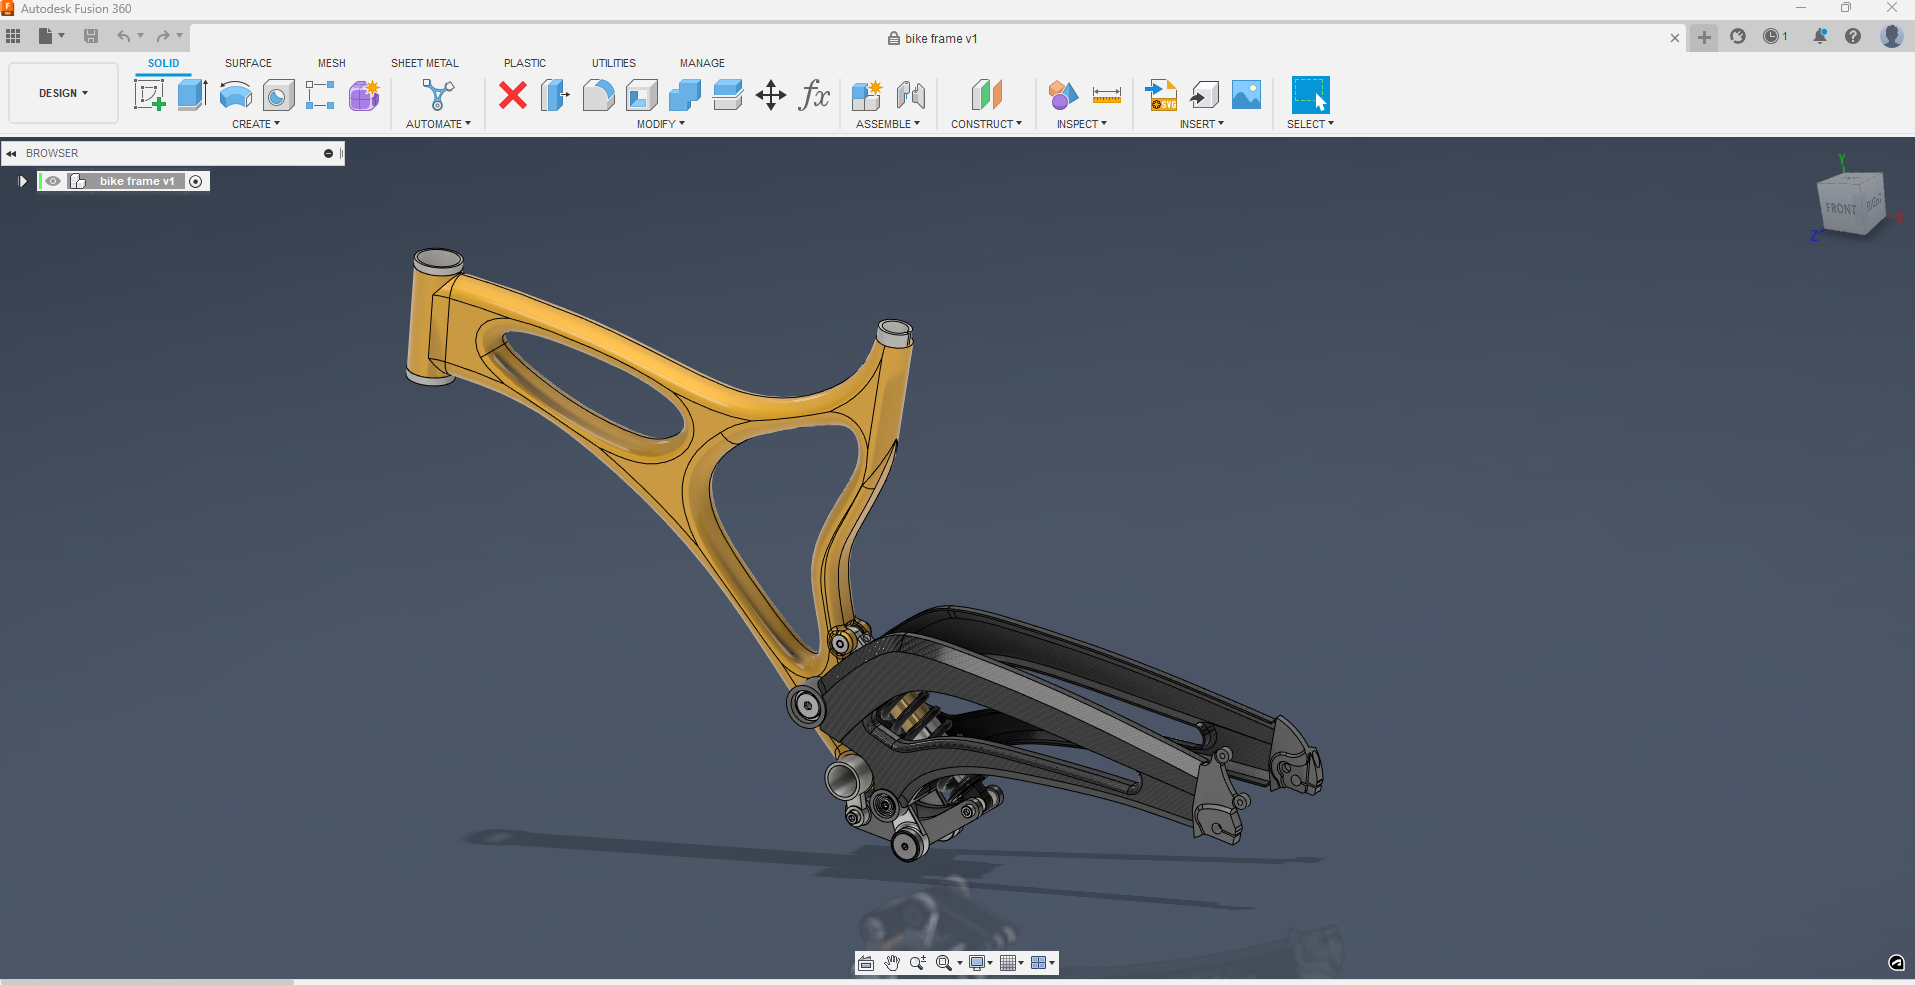 Screenshot of a model in Autodesk Fusion 360 software